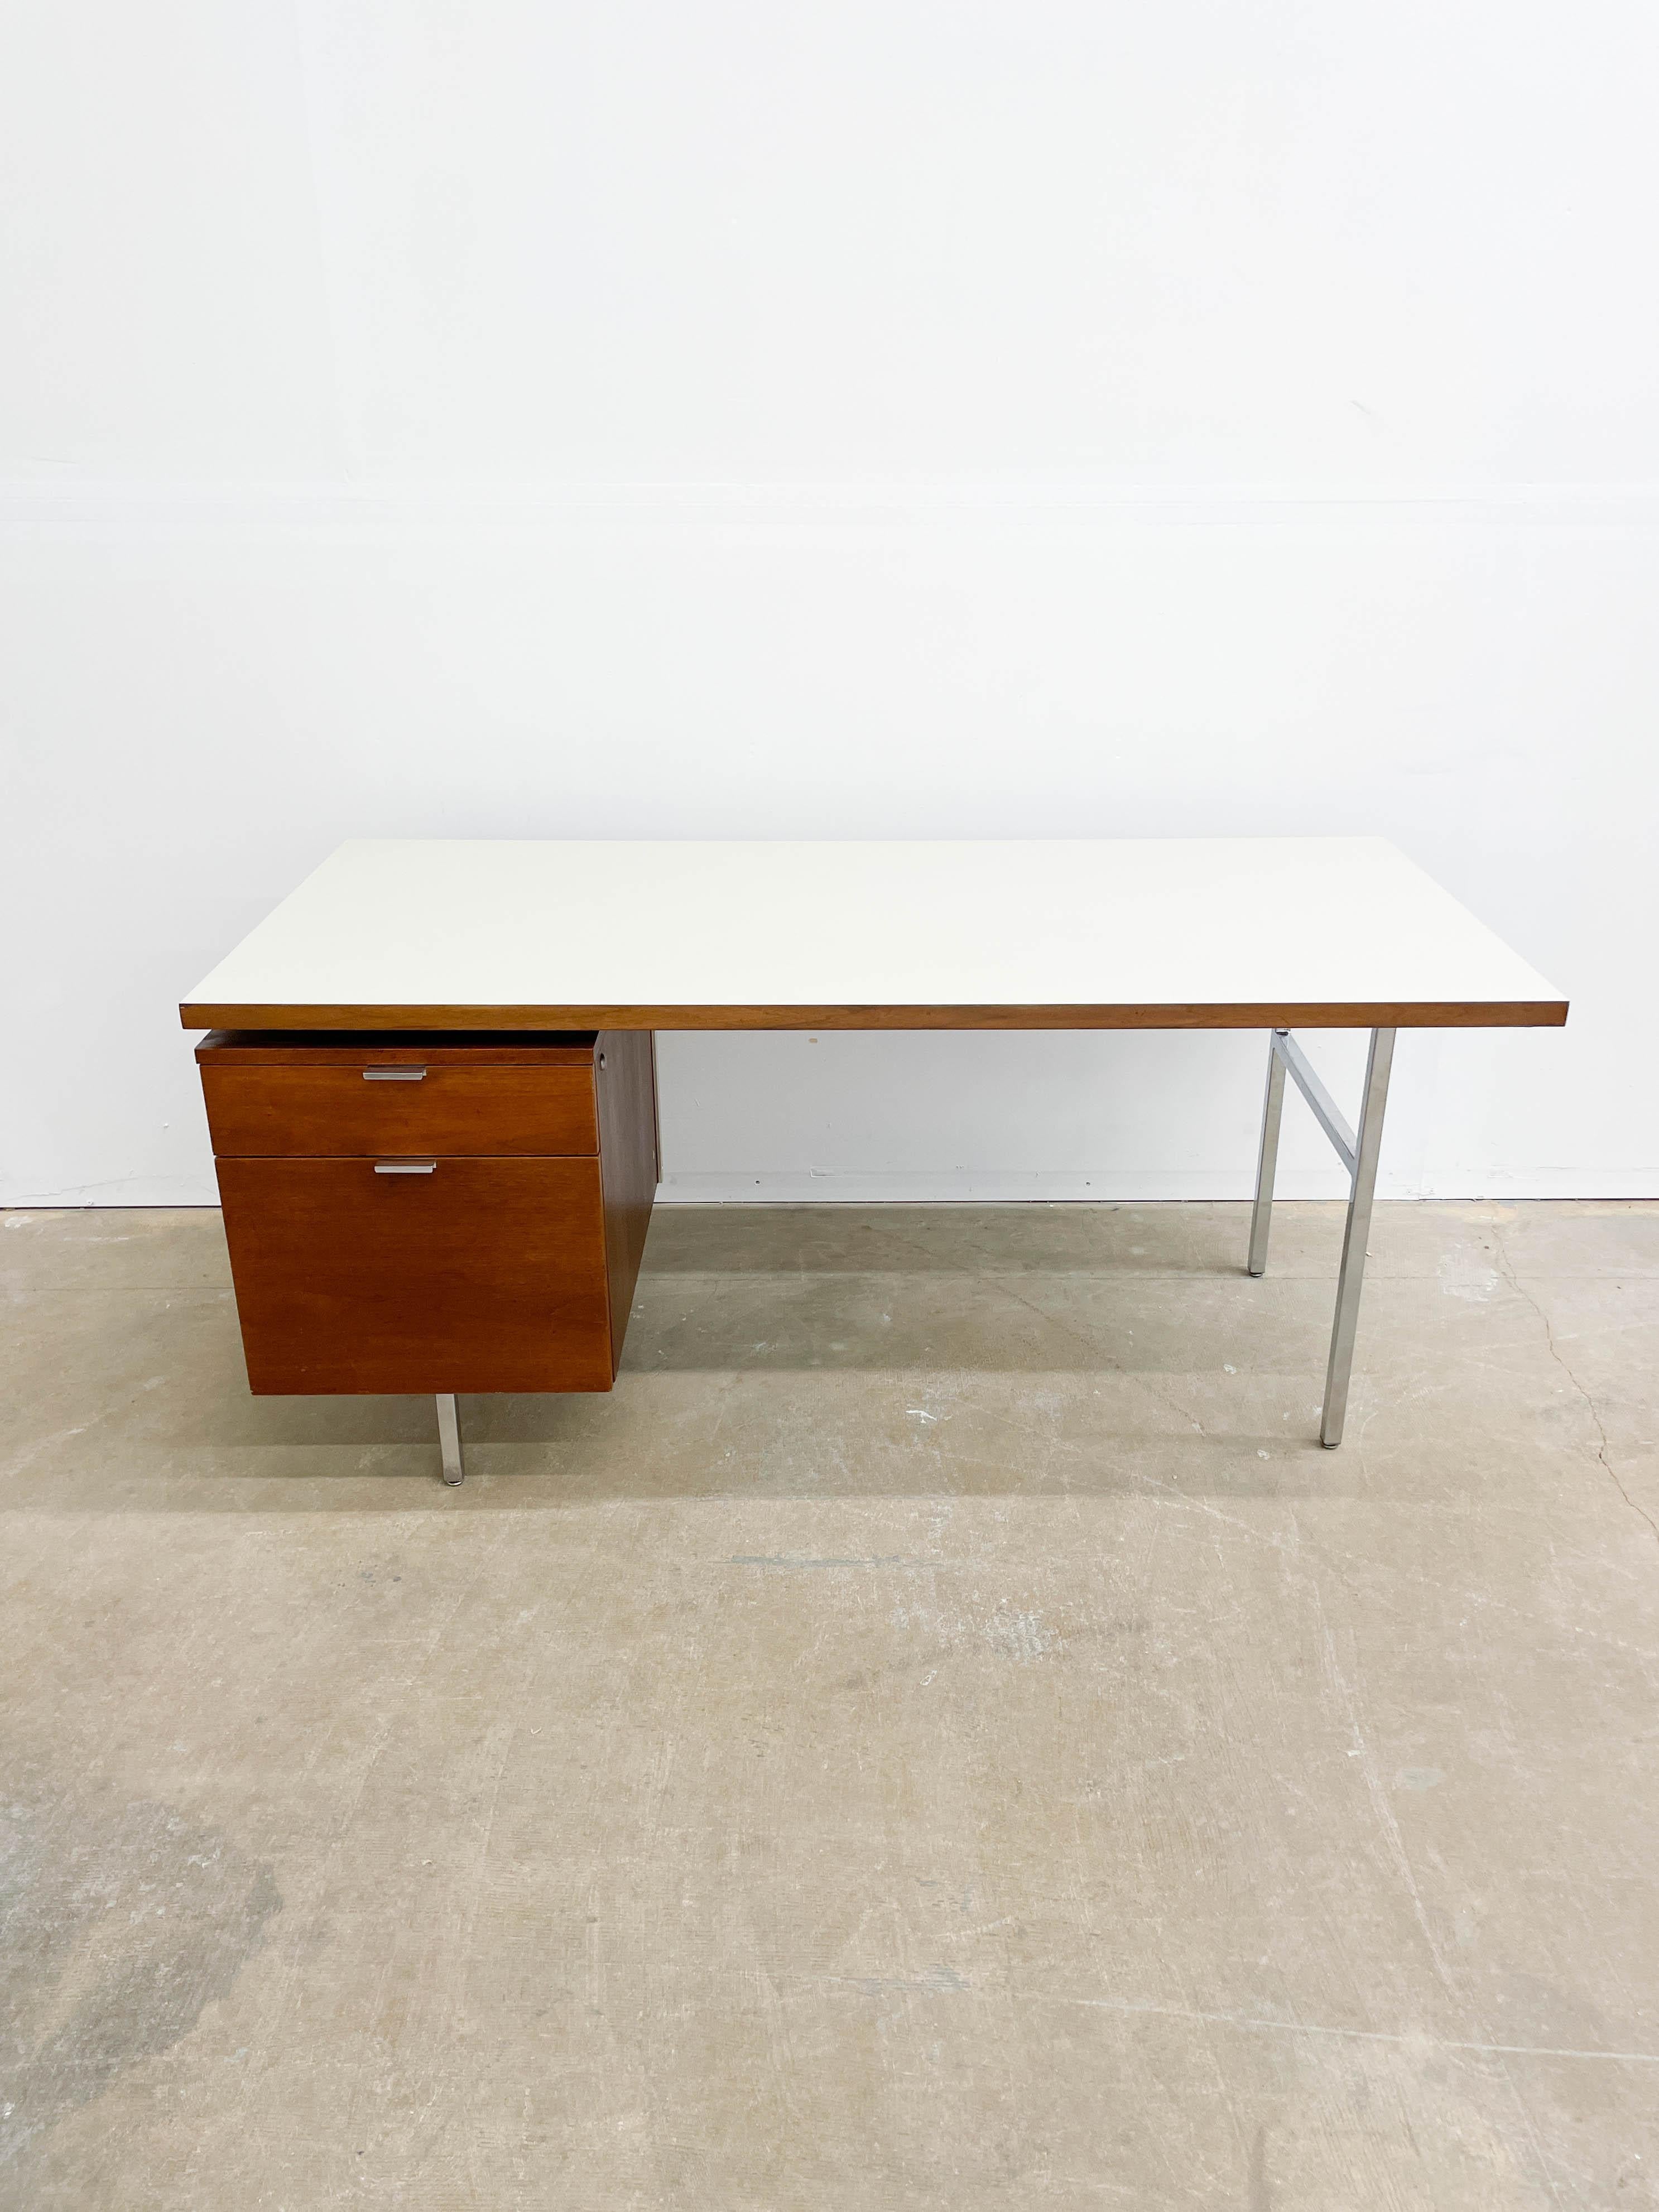 This is a Classic Mid-Century Modern desk in Walnut and white Formica that was designed by George Nelson for Herman Miller's Executive Office Group (better known today as EOG) in the 1950s. Clean lines and functionality are the name of the game